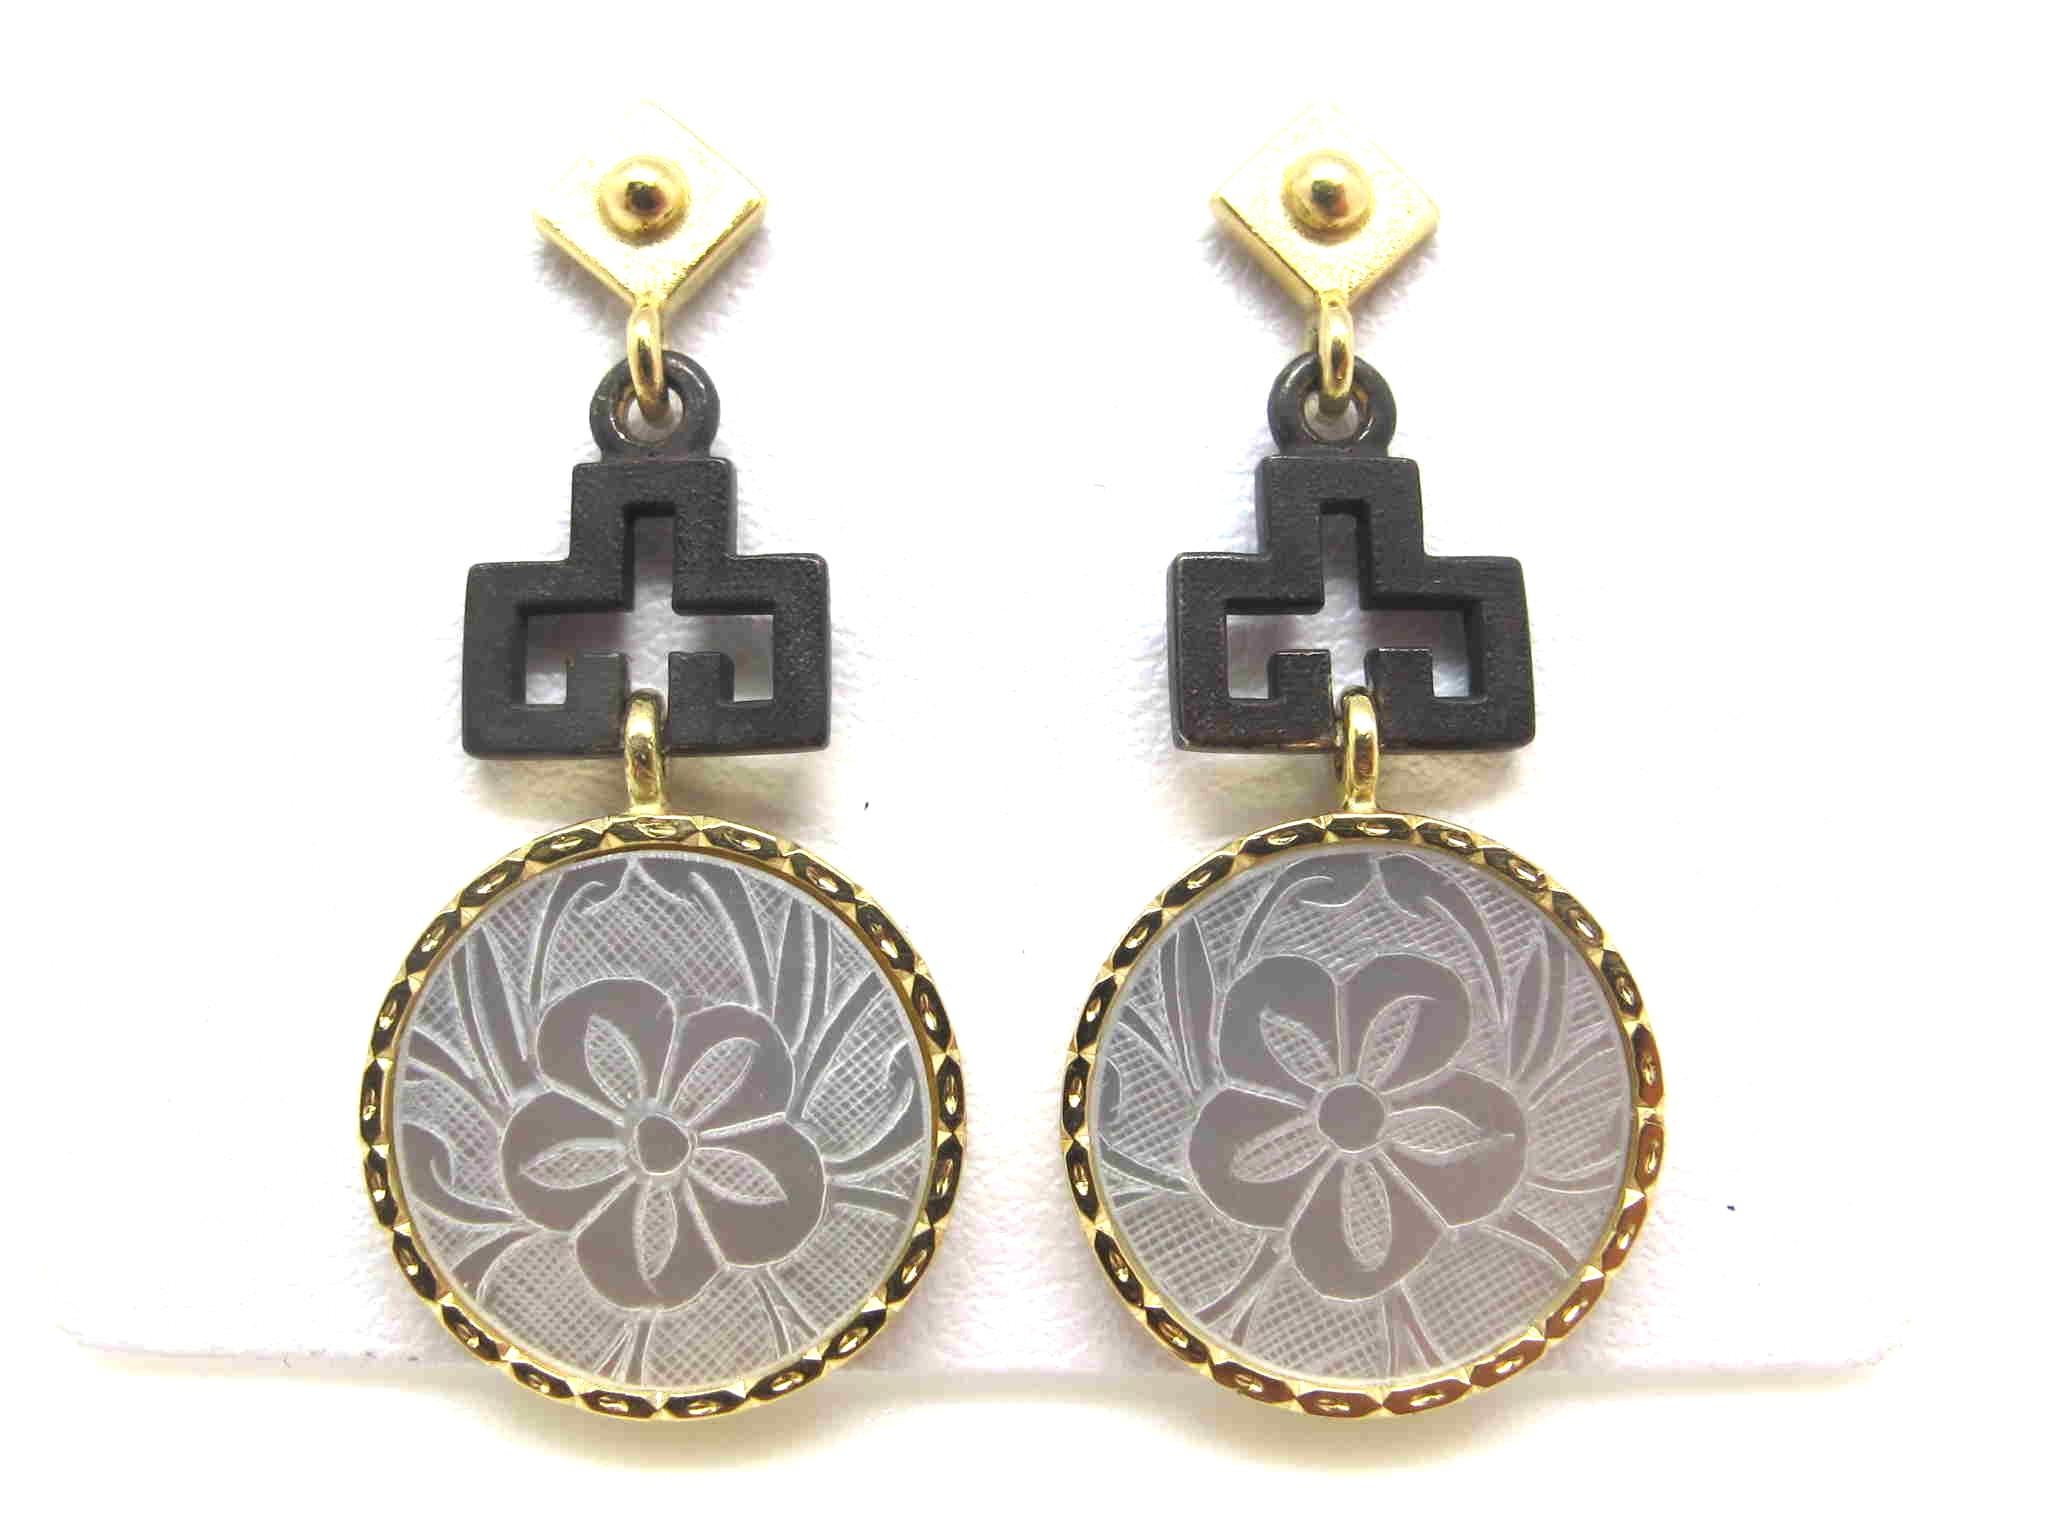 These earrings feature antique, mother-of-pearl Chinese gambling counters with motifs dating back to the 18th Century. They are original pieces that we have made in to jewelry. Originally carved in China for export to Britain, they were used like we